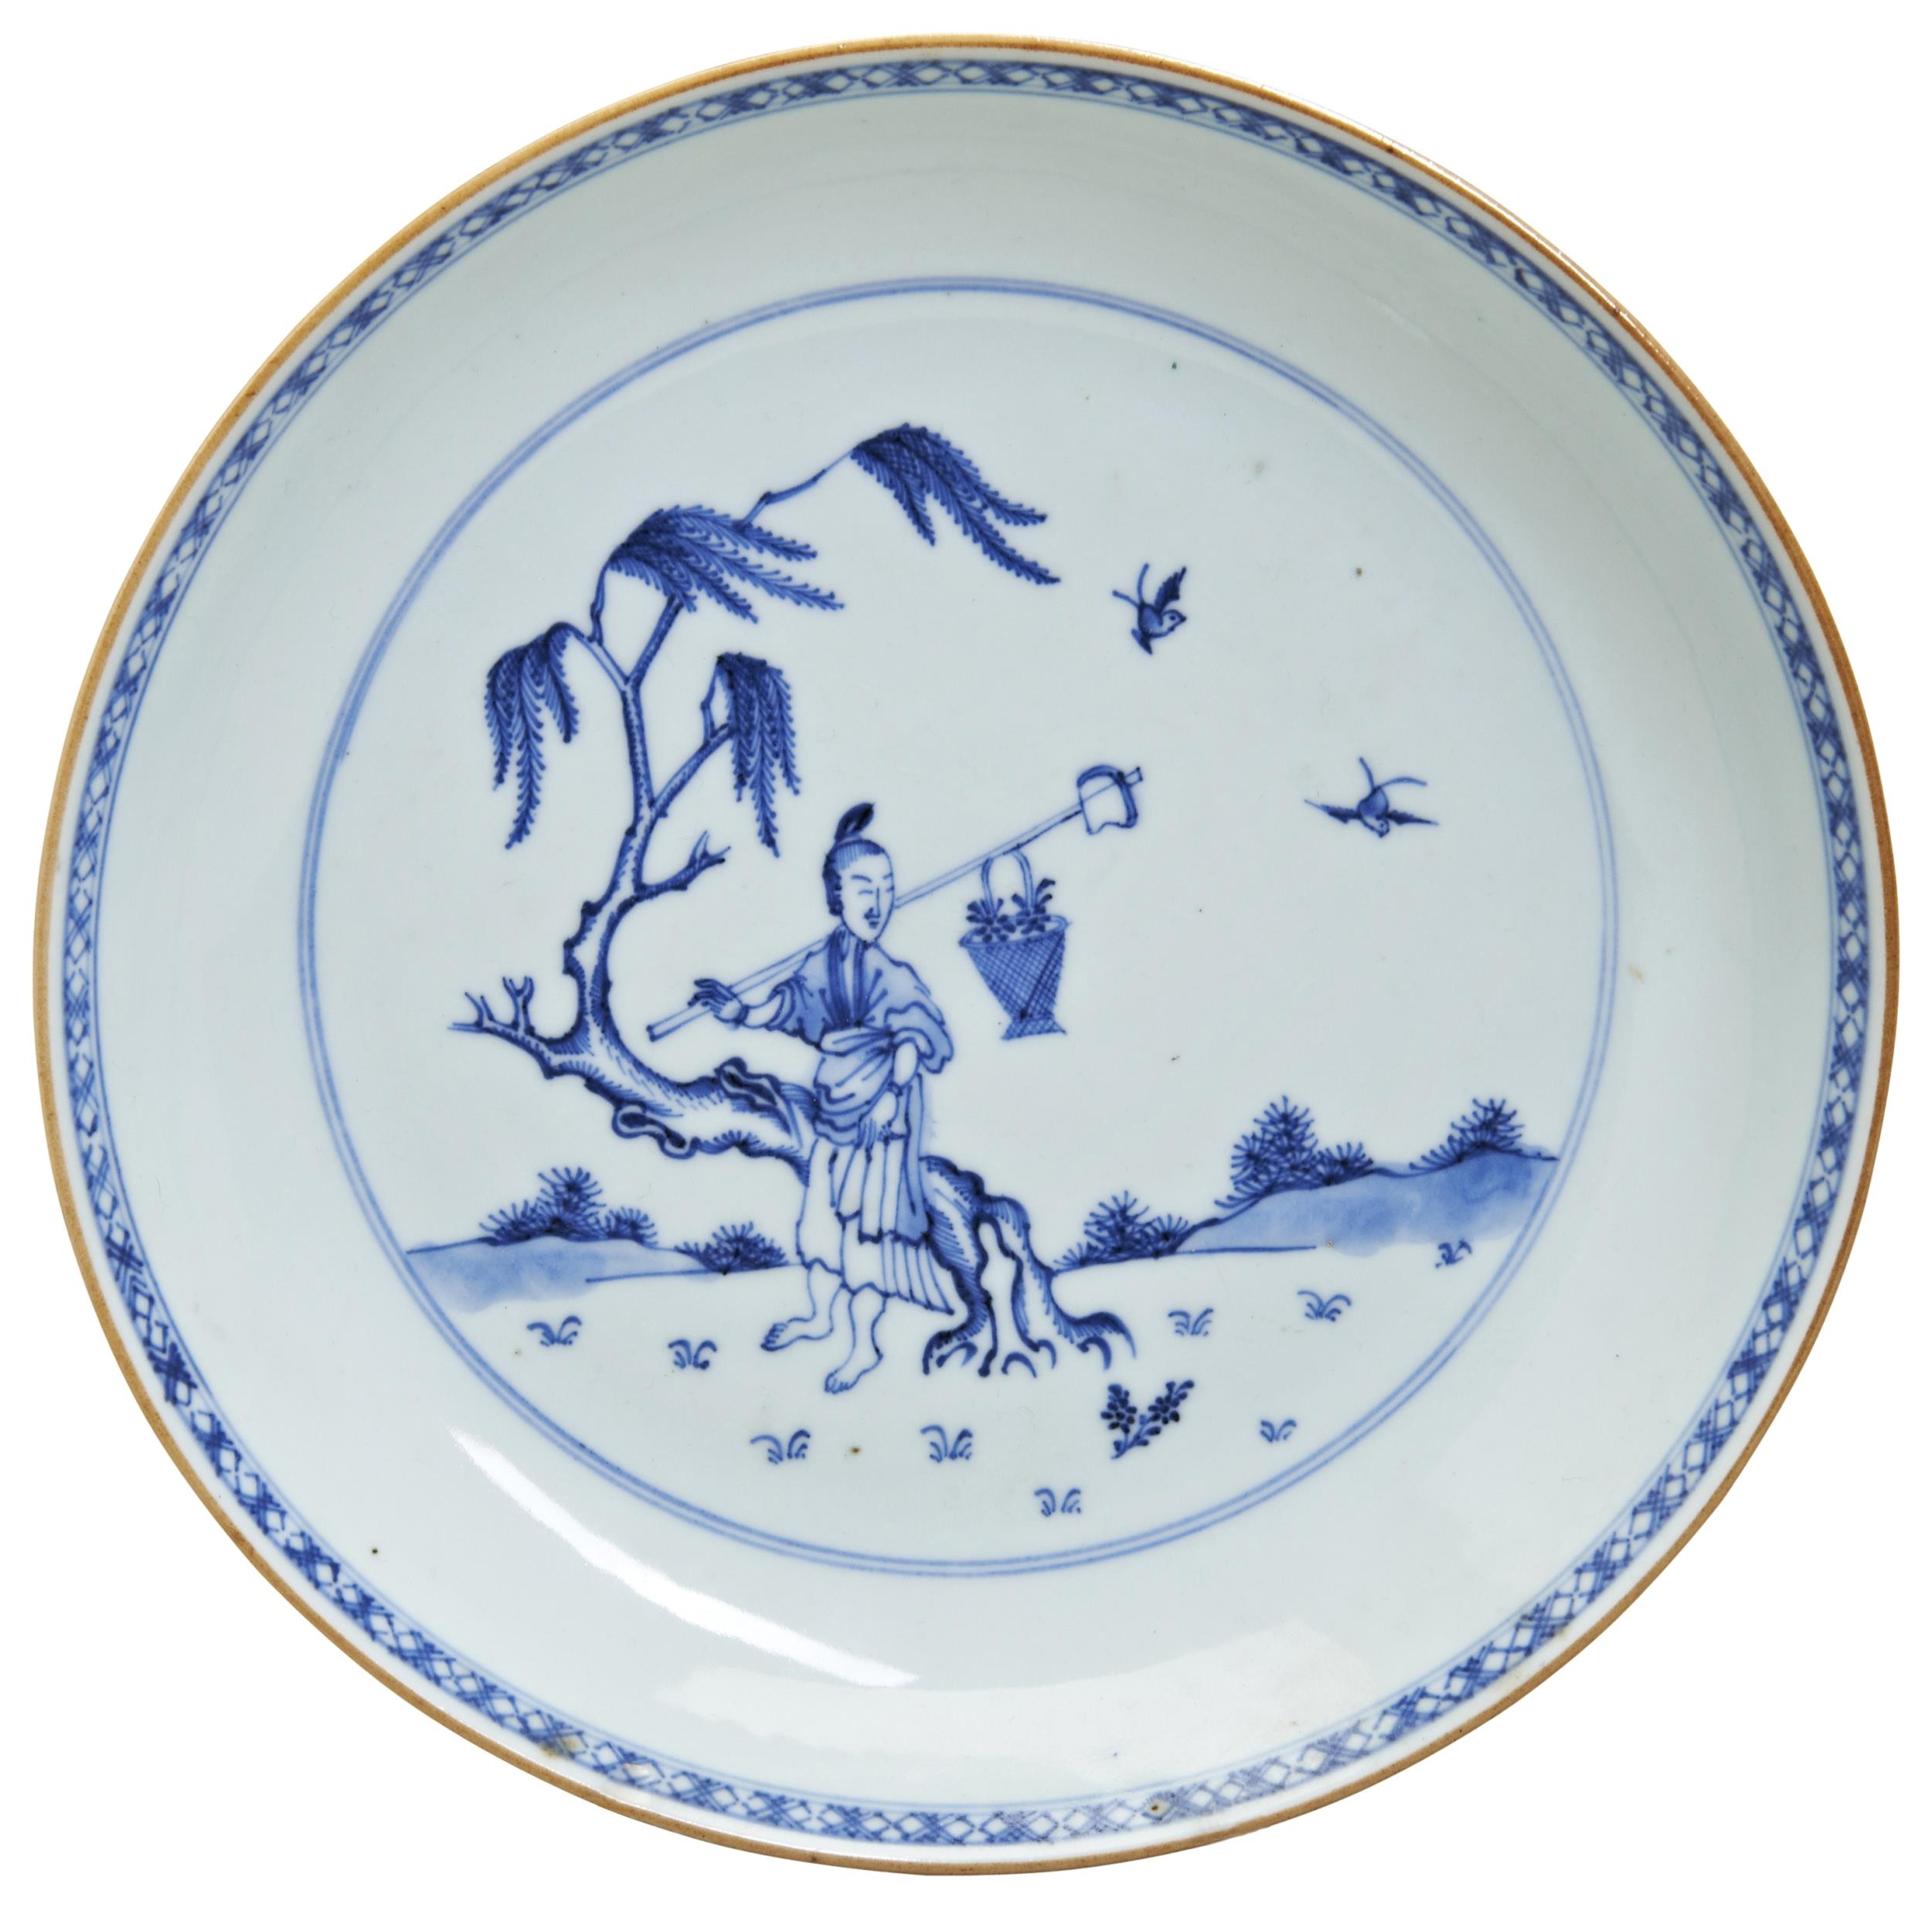 A BLUE AND WHITE DISH QING DYNASTY, 18TH CENTURY fienly painted with a figure seated beneath a - Image 2 of 3